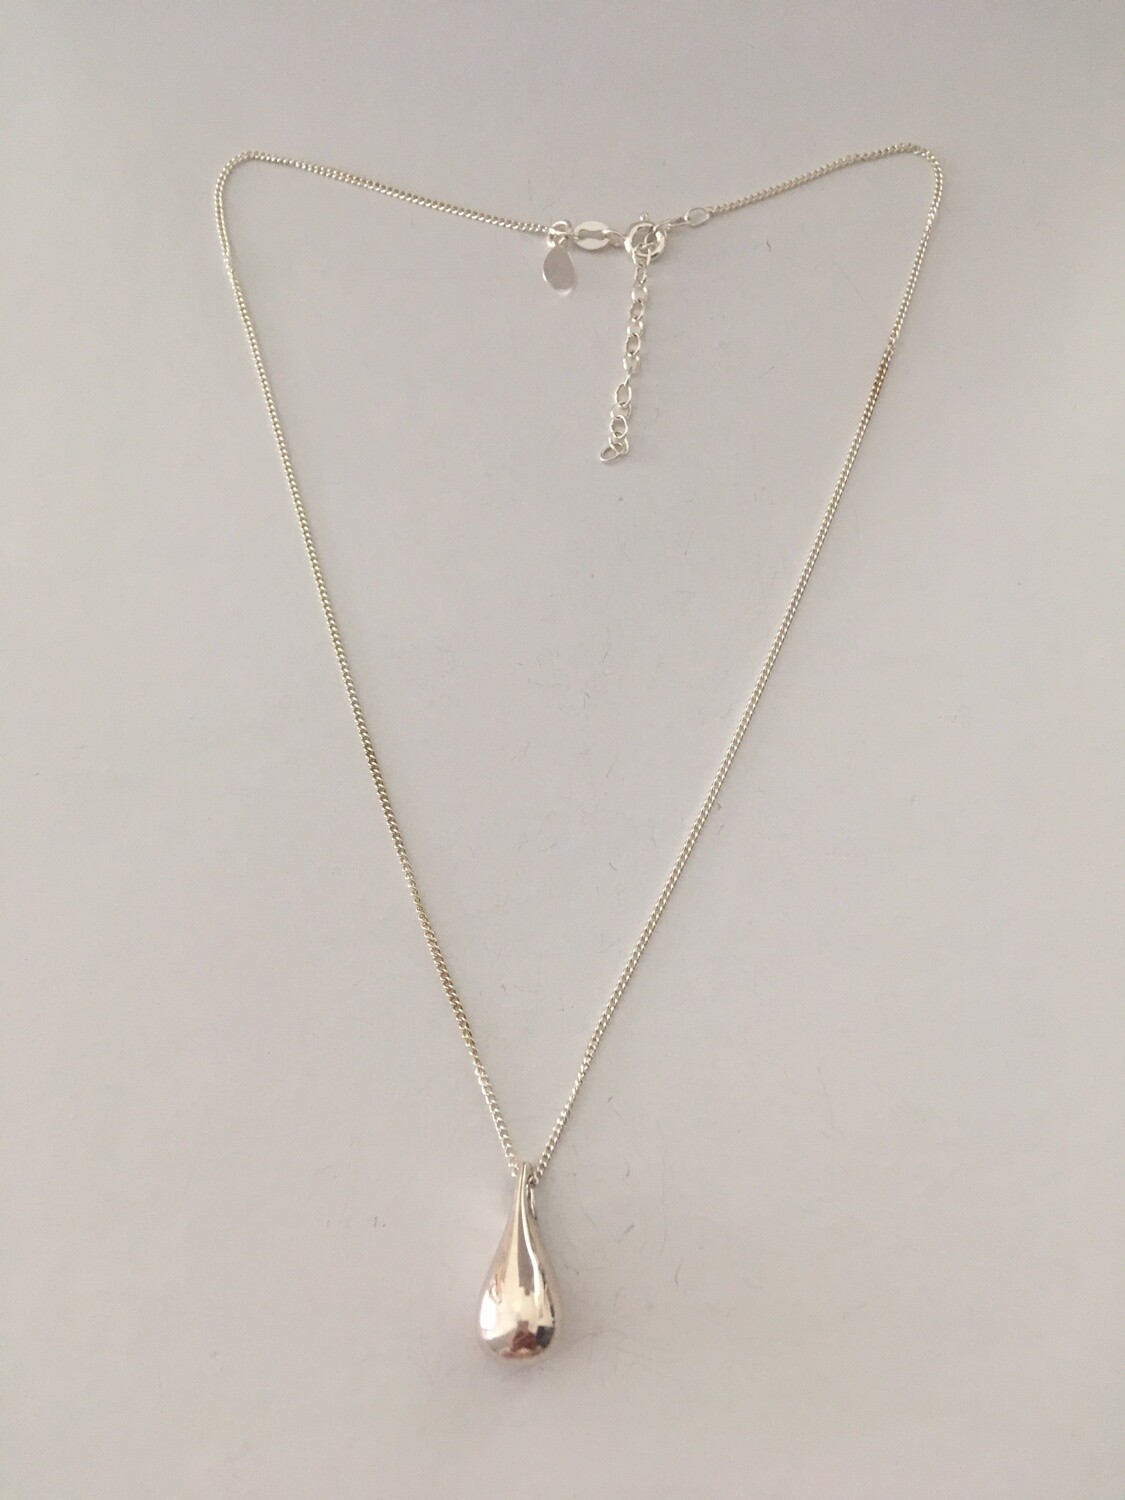 Curb Chain with Drop Fine Sterling Silver Necklace